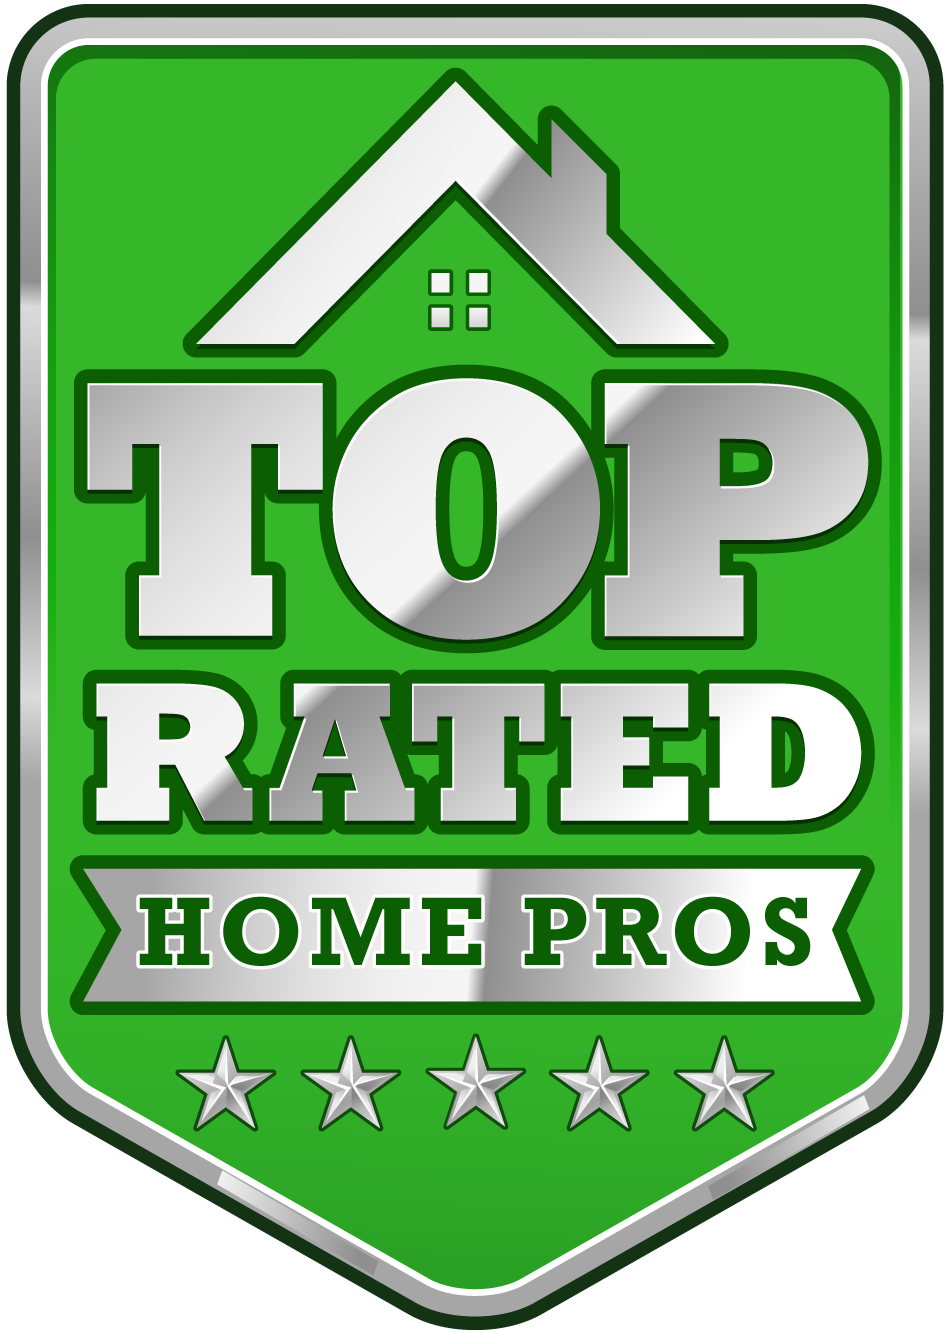 Top Rated Home Professionals